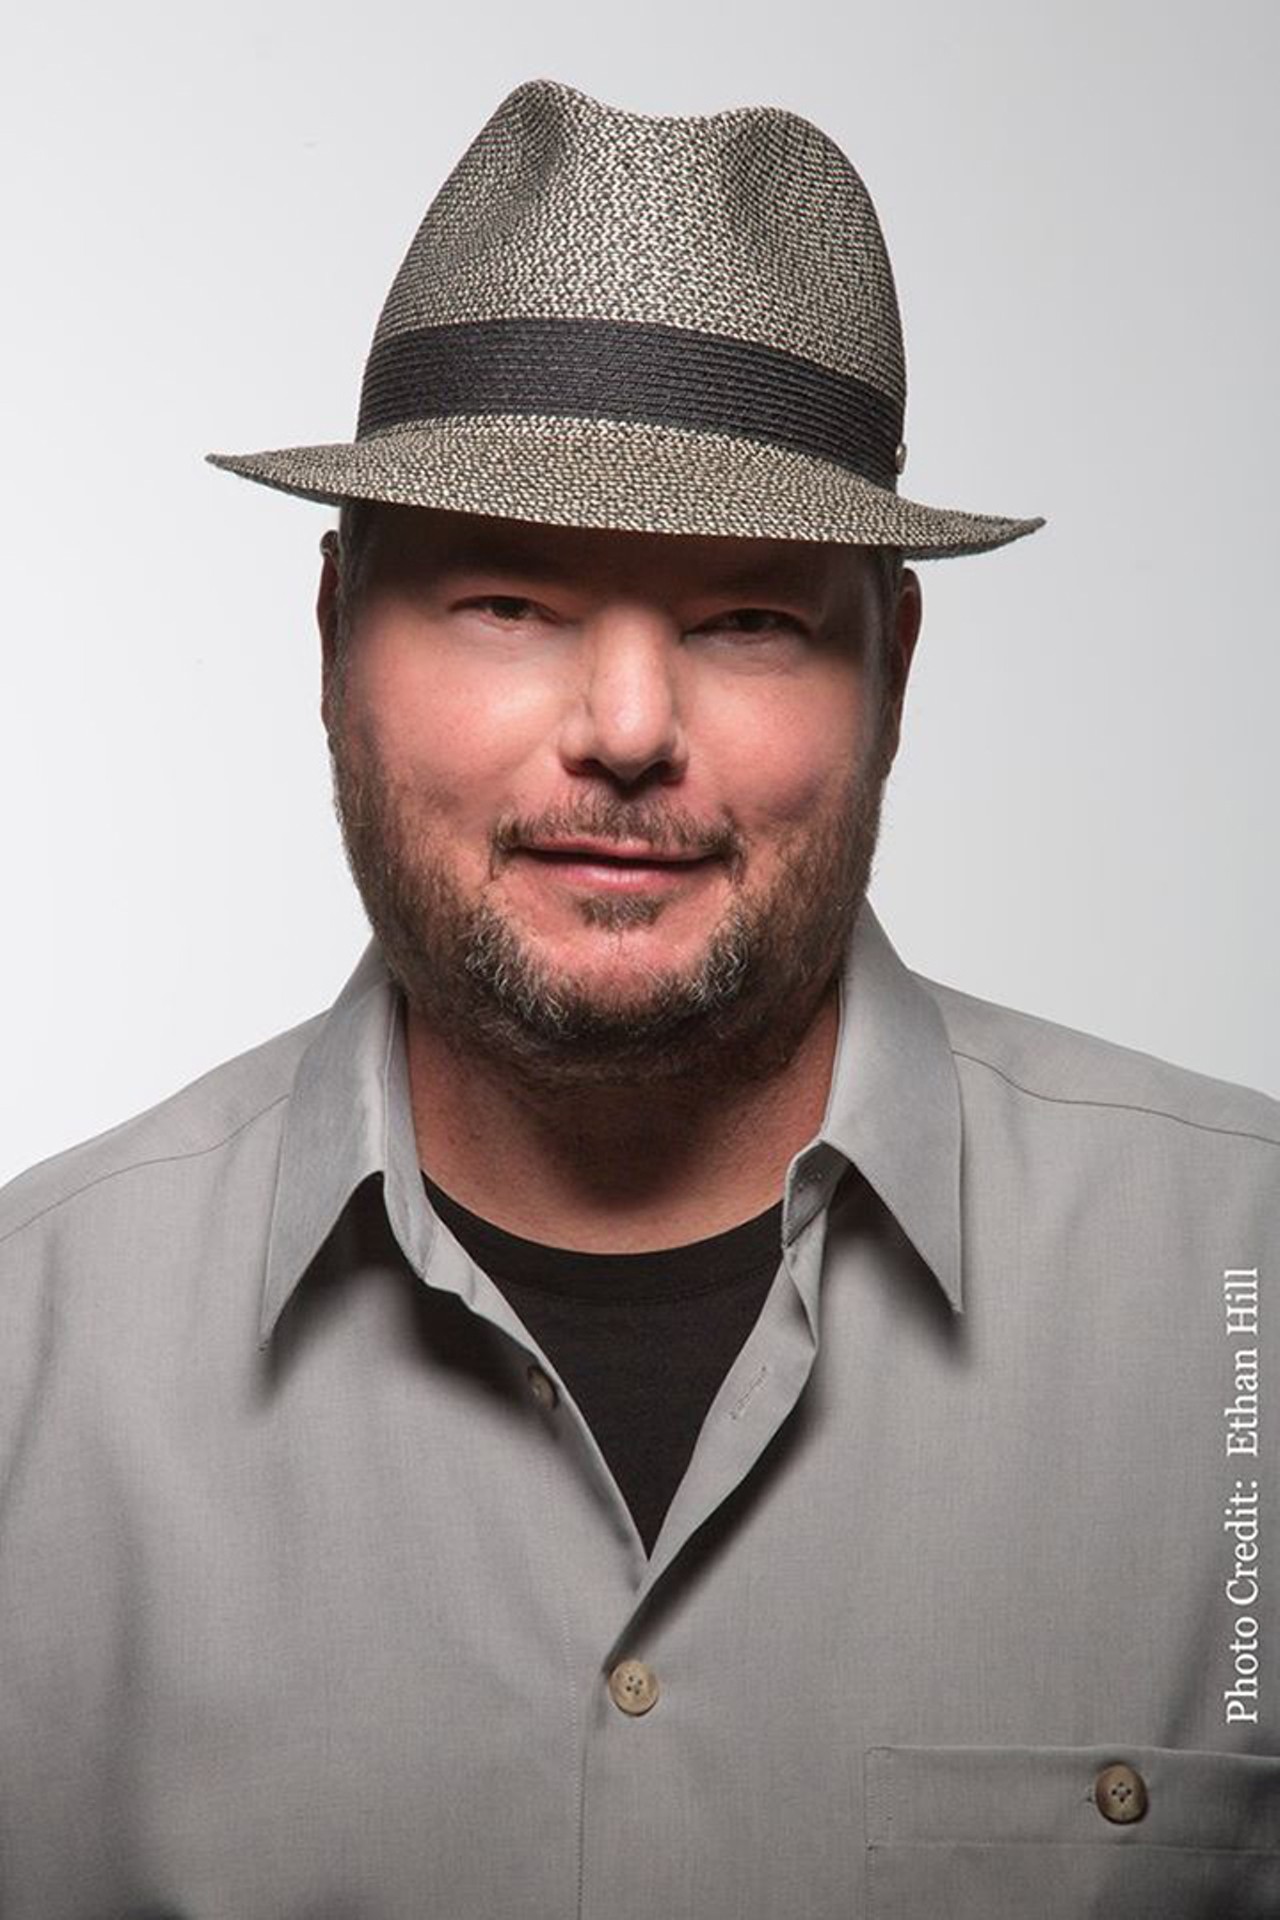 Thursday, May 4Christopher Cross at the Plaza Live